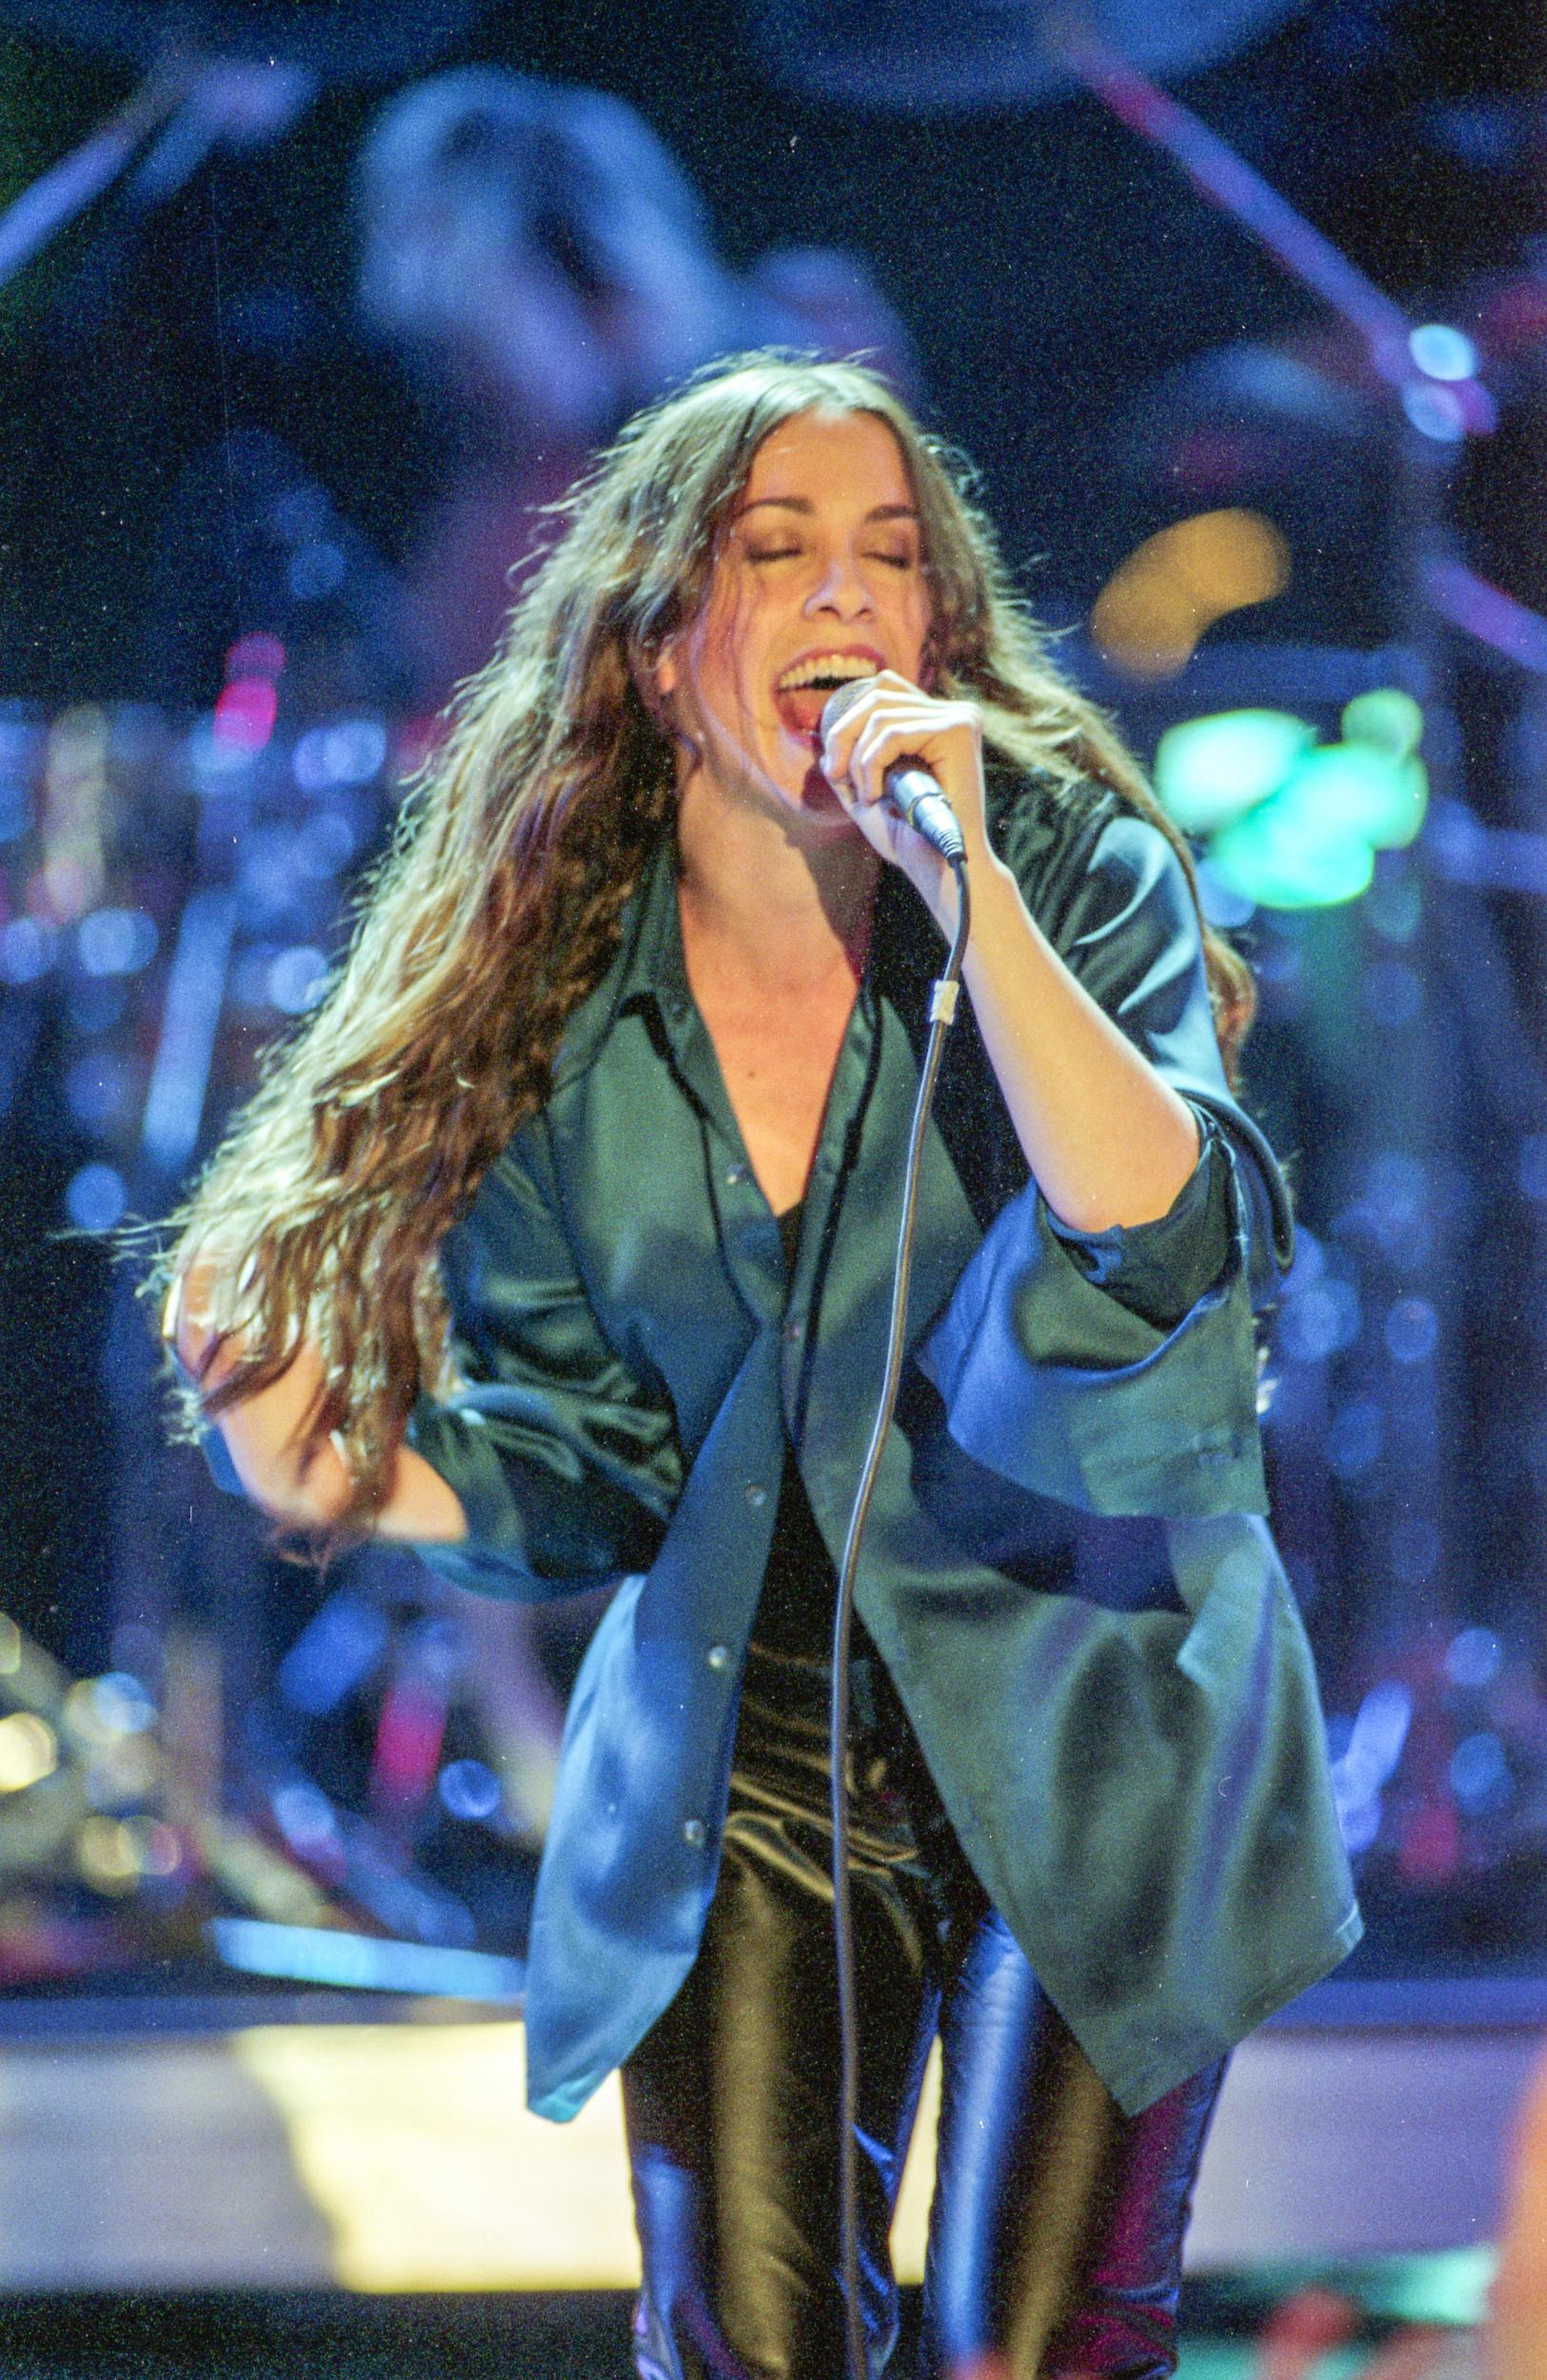 Alanis Morissette performs at the Brit Awards 1996